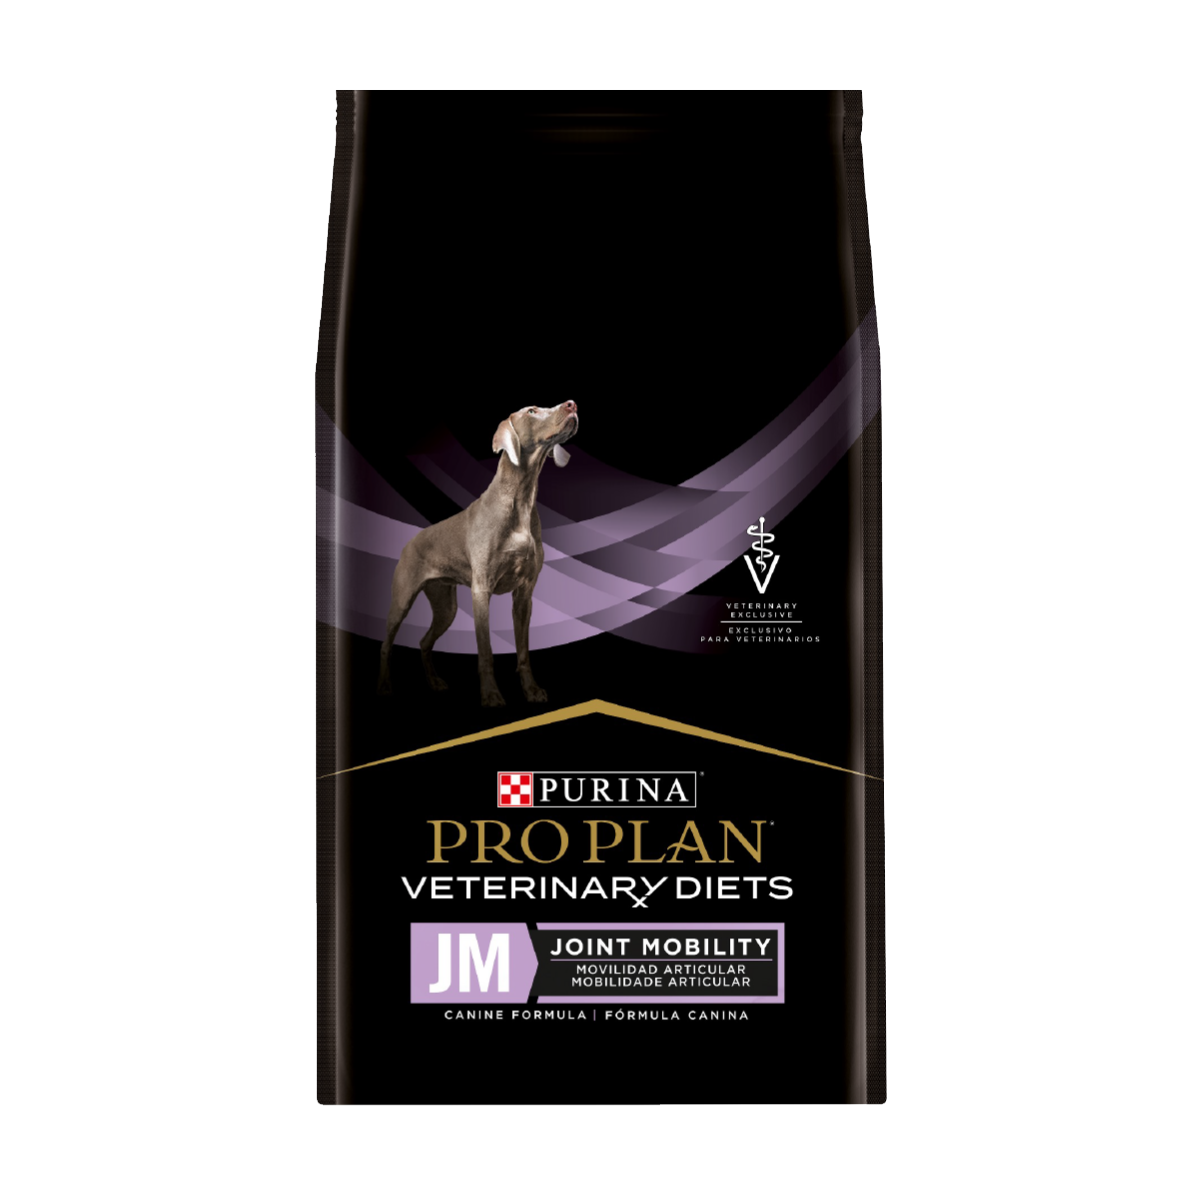 purina-pro-plan-veterinay-diets-dog-jm-joint-mobility.png